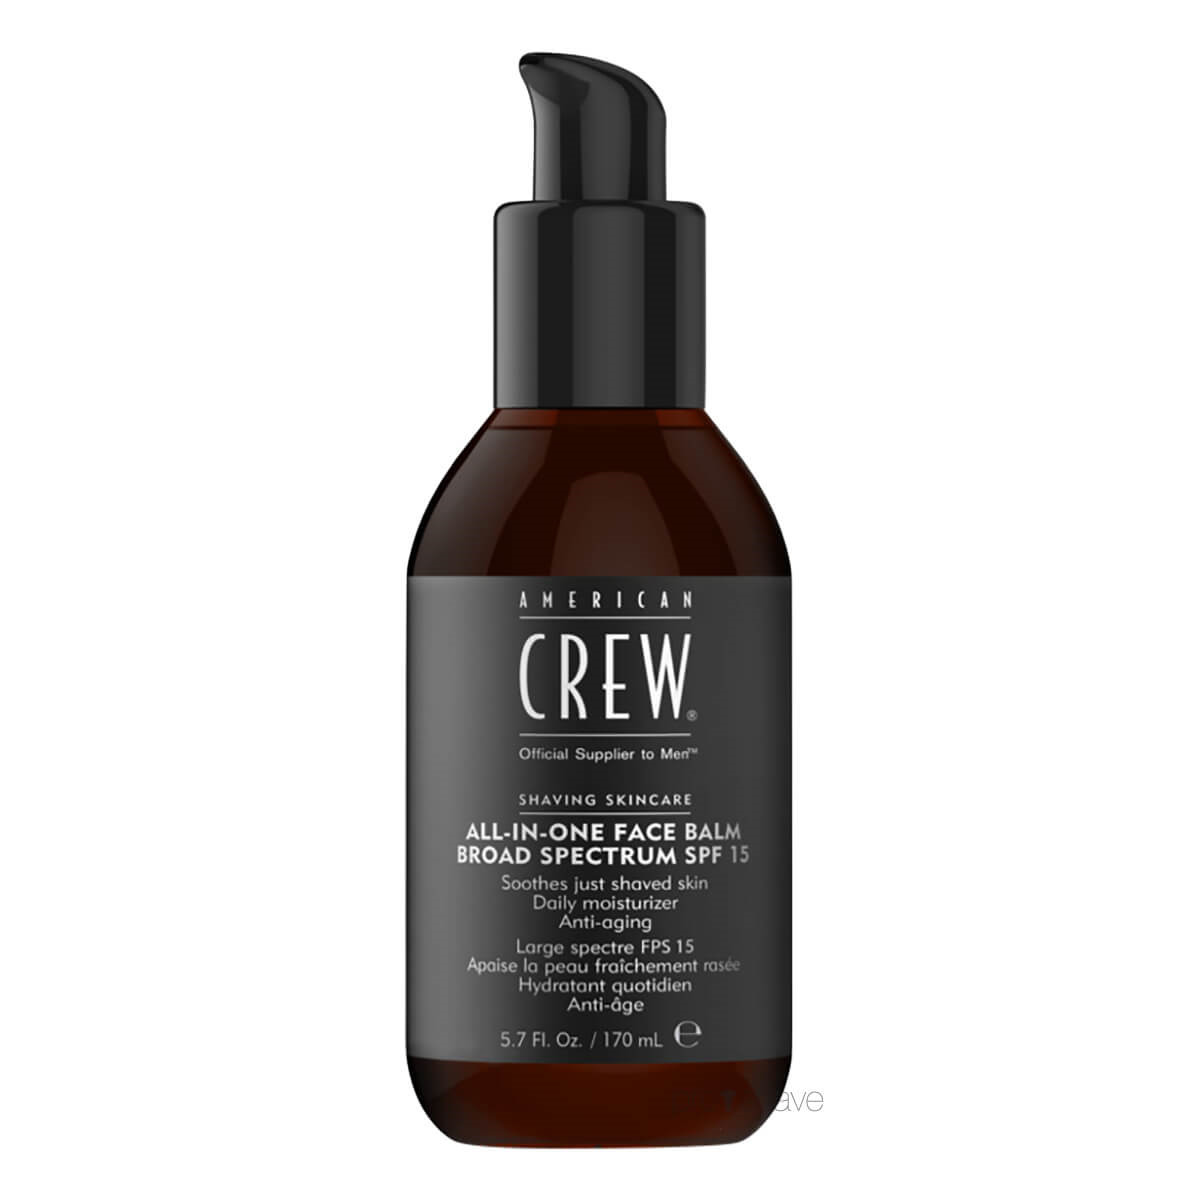 American Crew All-in-one Face Balm, SPF 15, 170 ml.